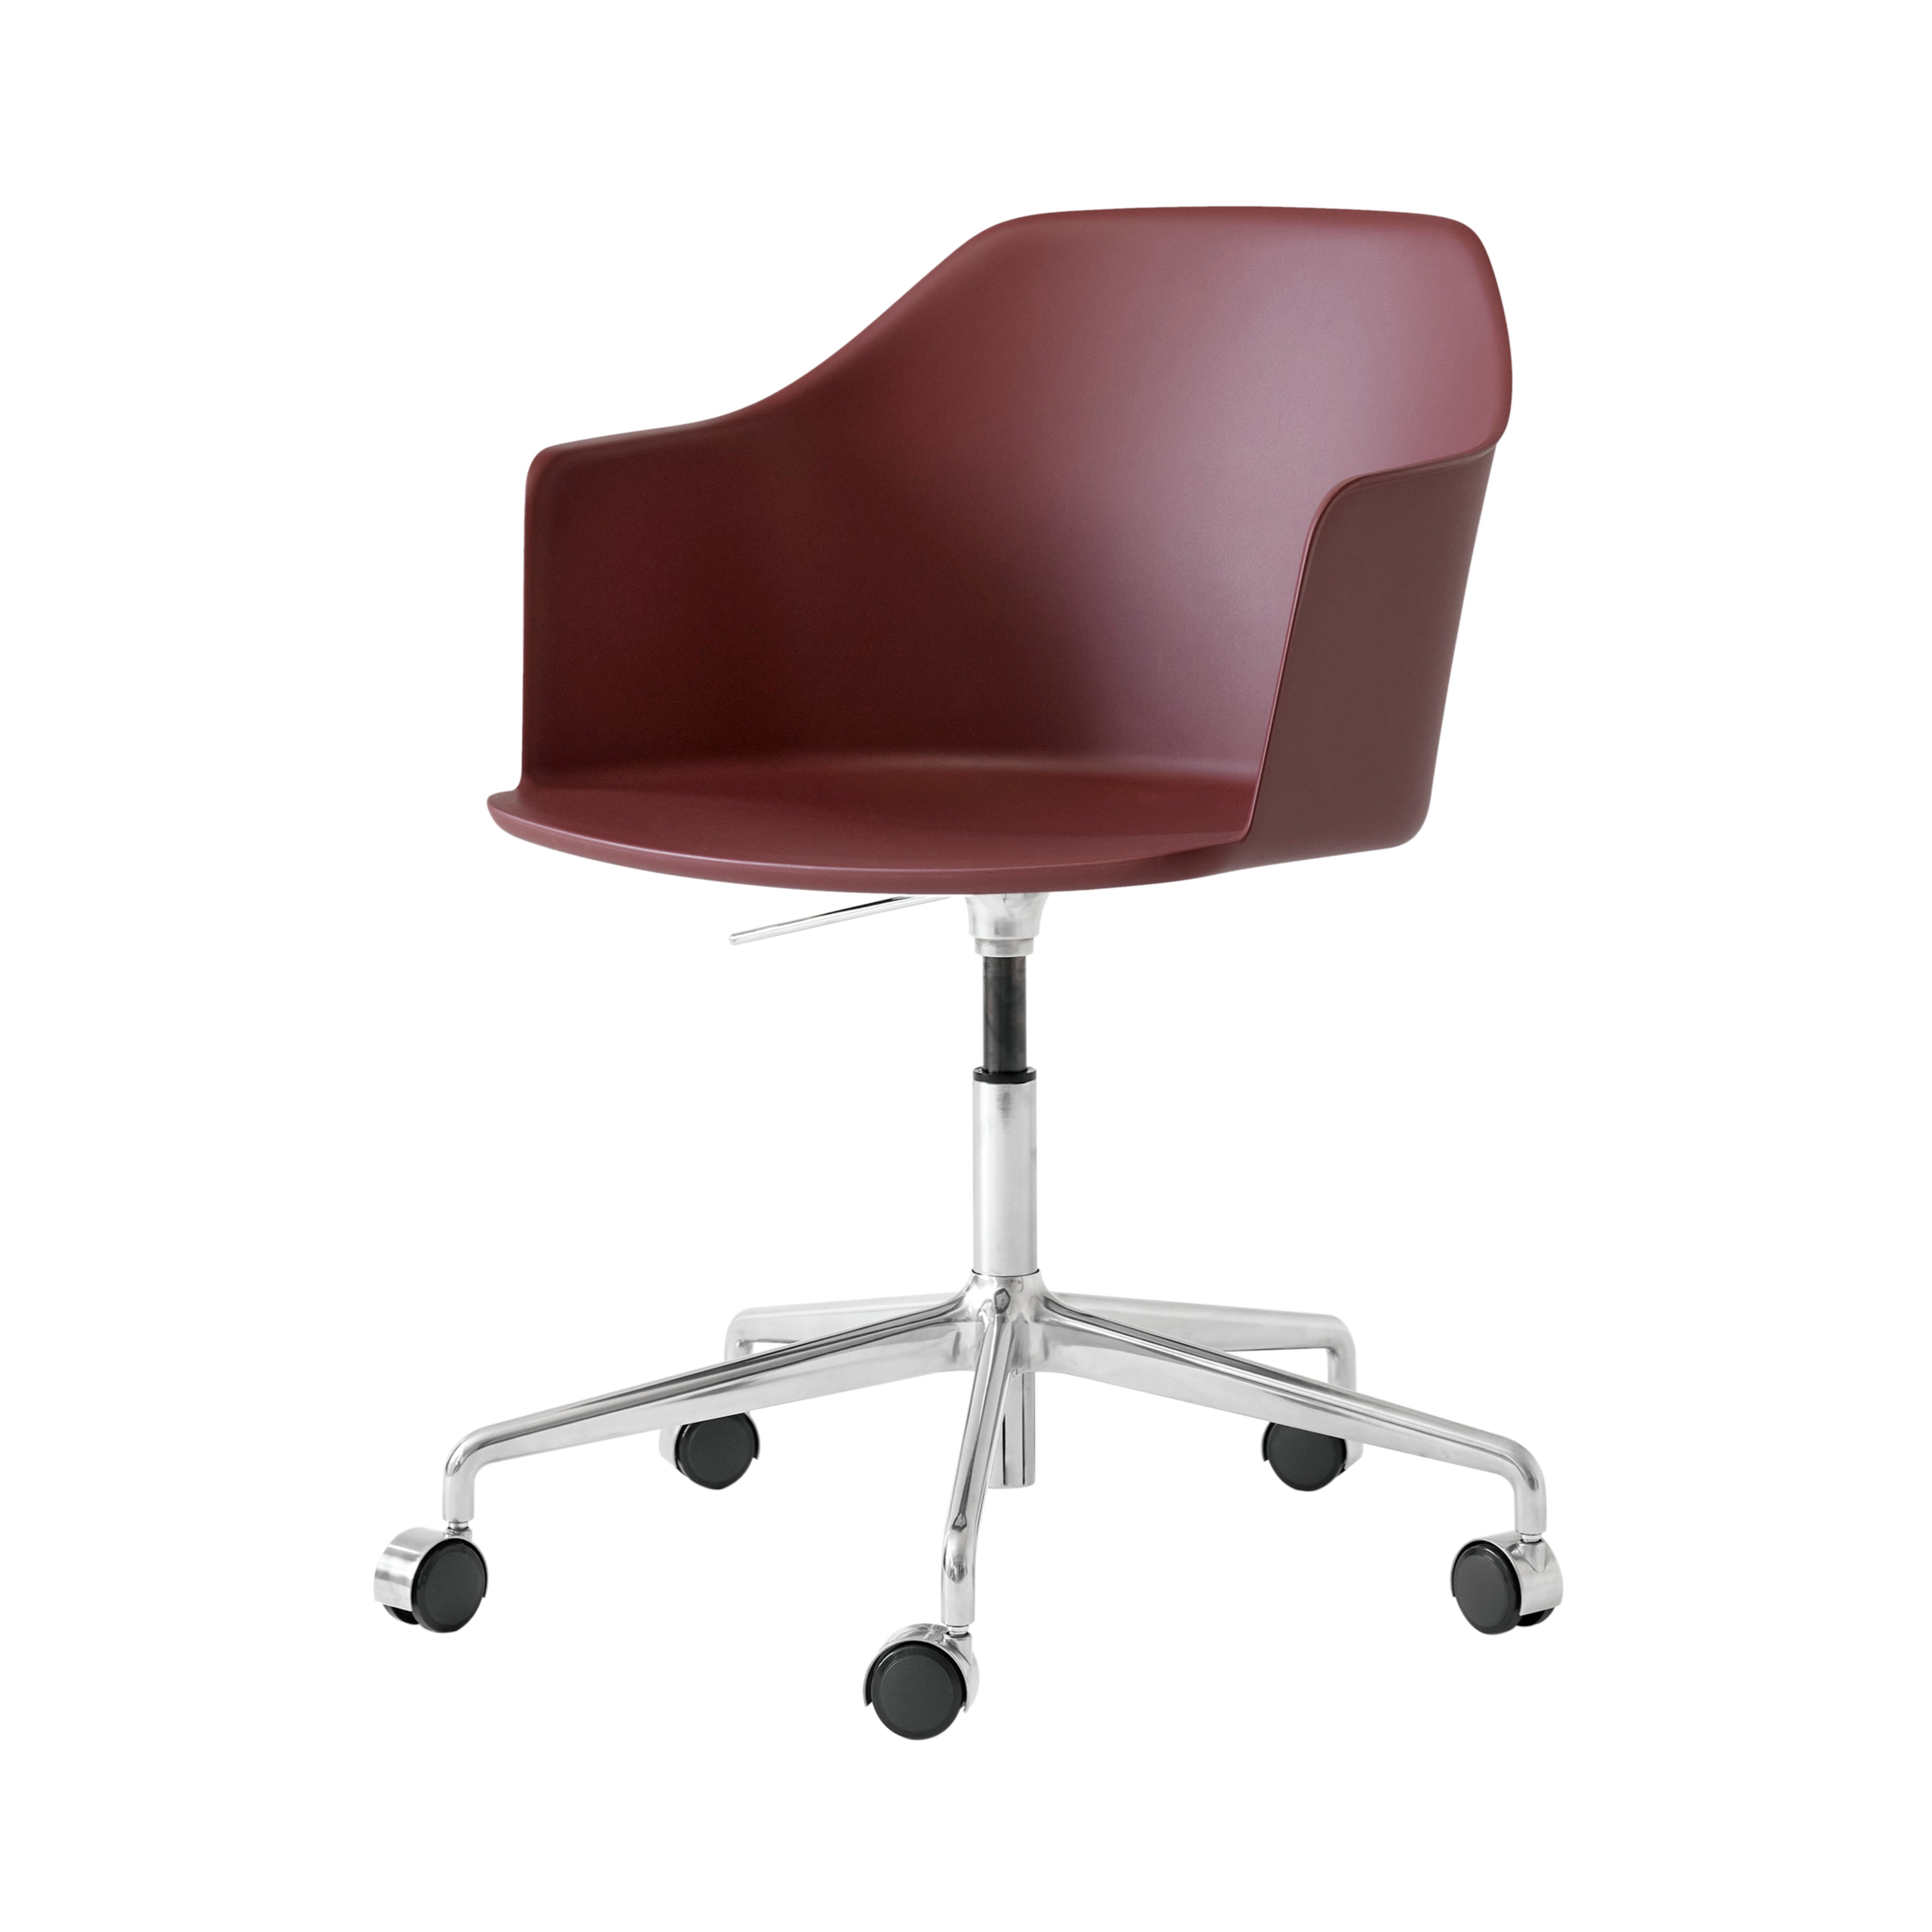 Rely Chair HW53: Red Brown + Polished Aluminum